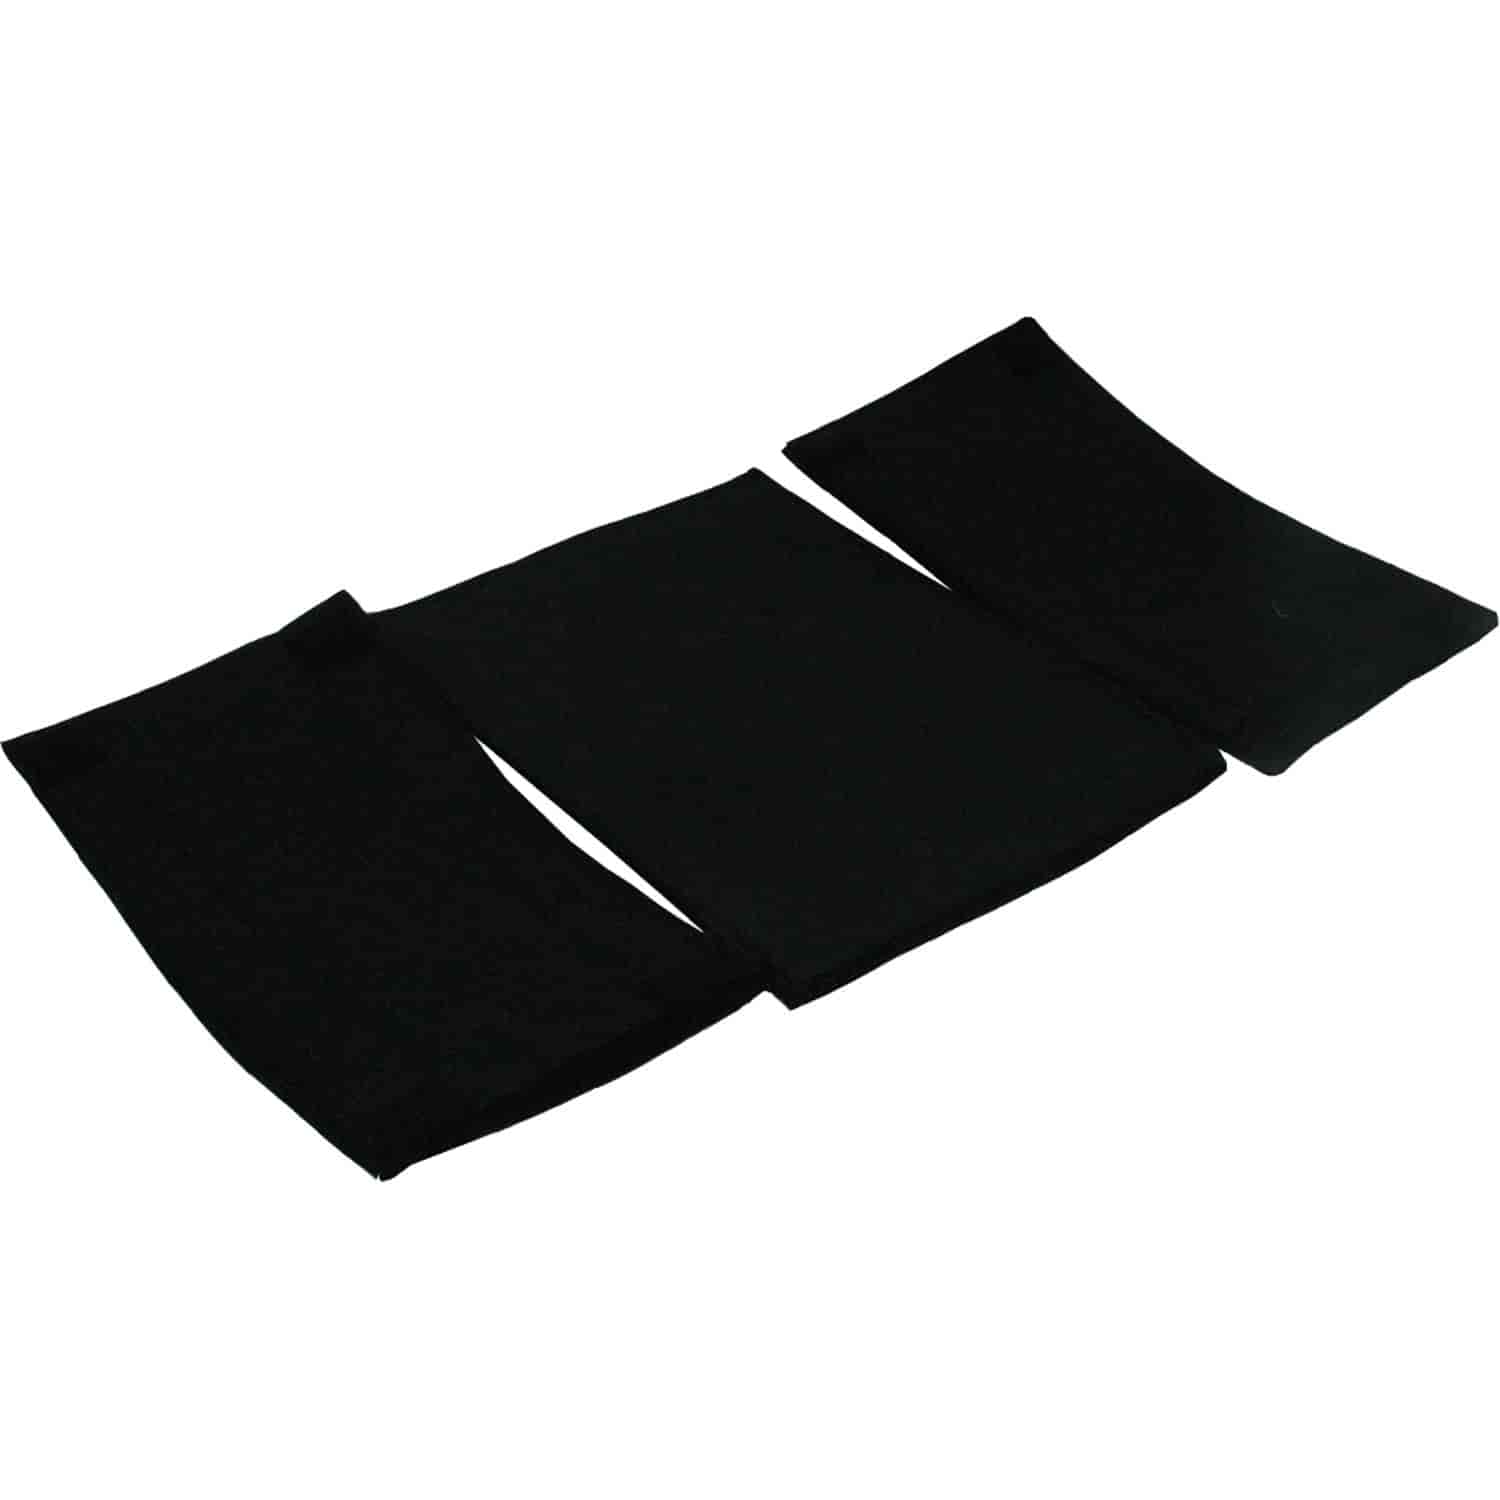 Replacement Oil Pads for 821-7809A Pad One Dimensions: 17" x 20"